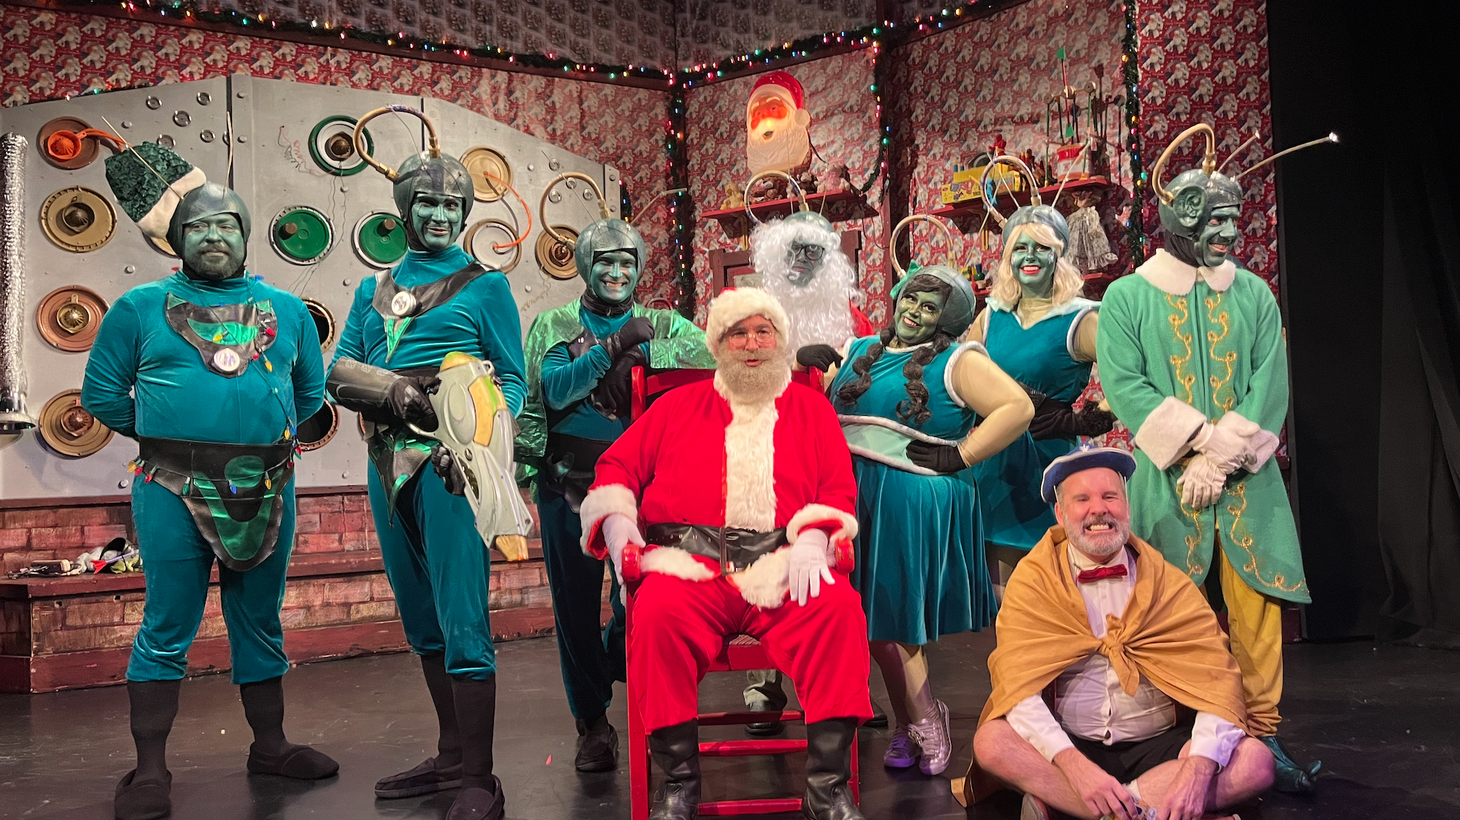 The 2023 cast of “Santa Claus Conquers the Martians” at the Maverick Theater in Fullerton gathers to take pictures with audience members after the show.